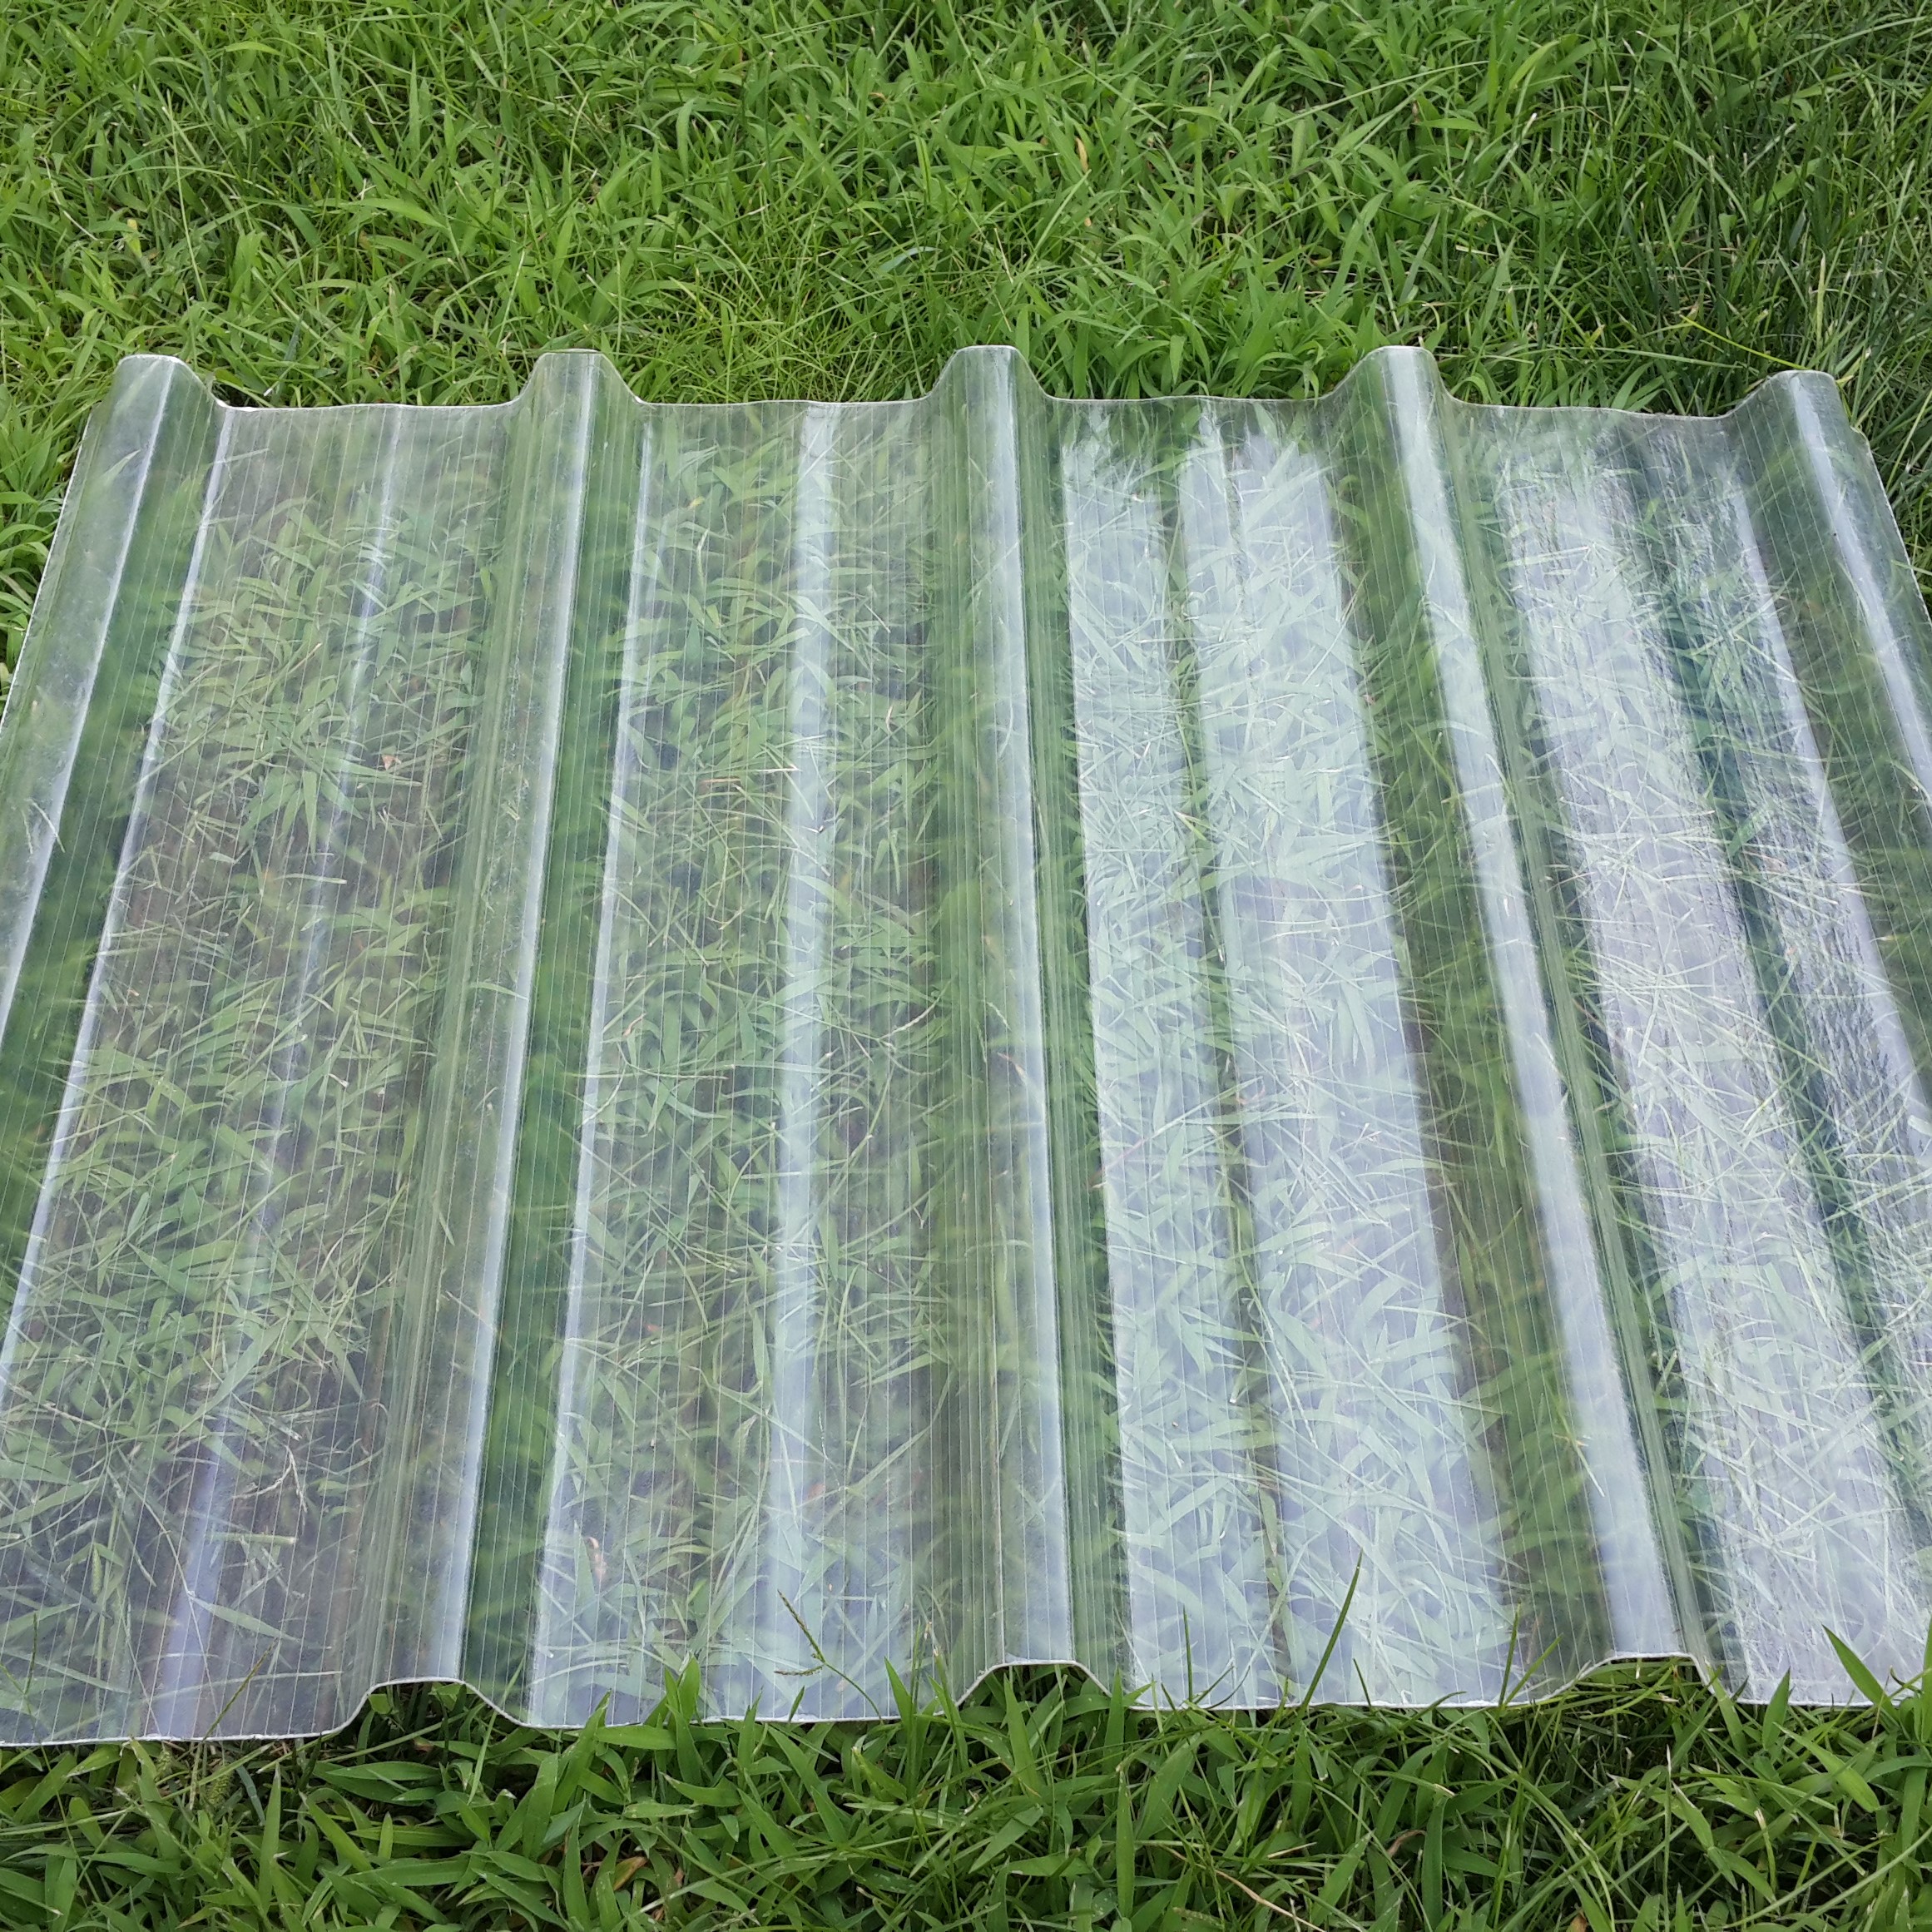 best selling products lightweight corrugated plastic panel clear pvc translucent roofing sheet